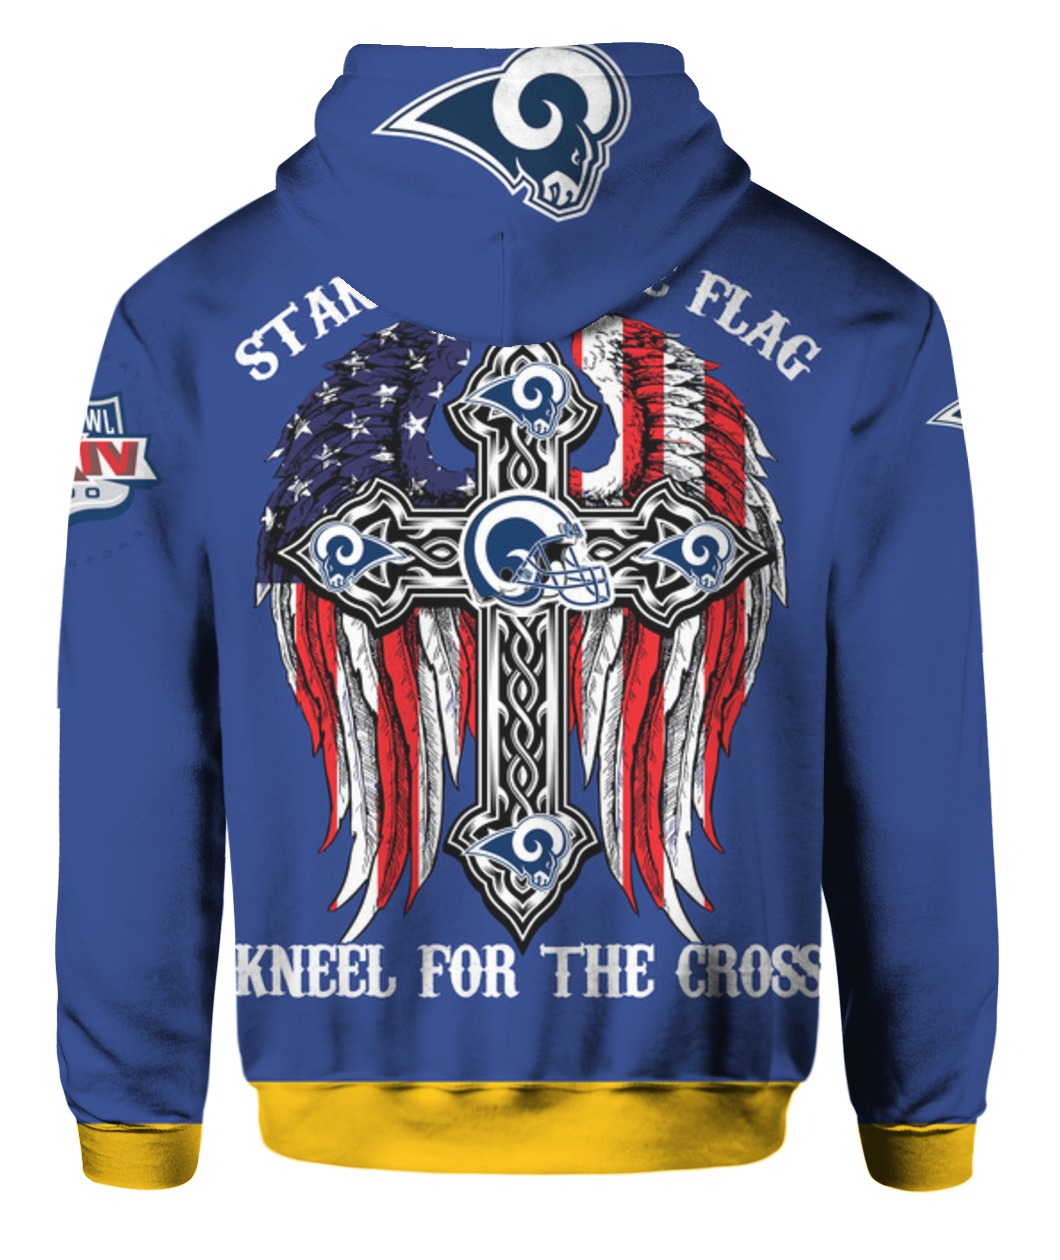 Stand for the flag all over print shirt - maria